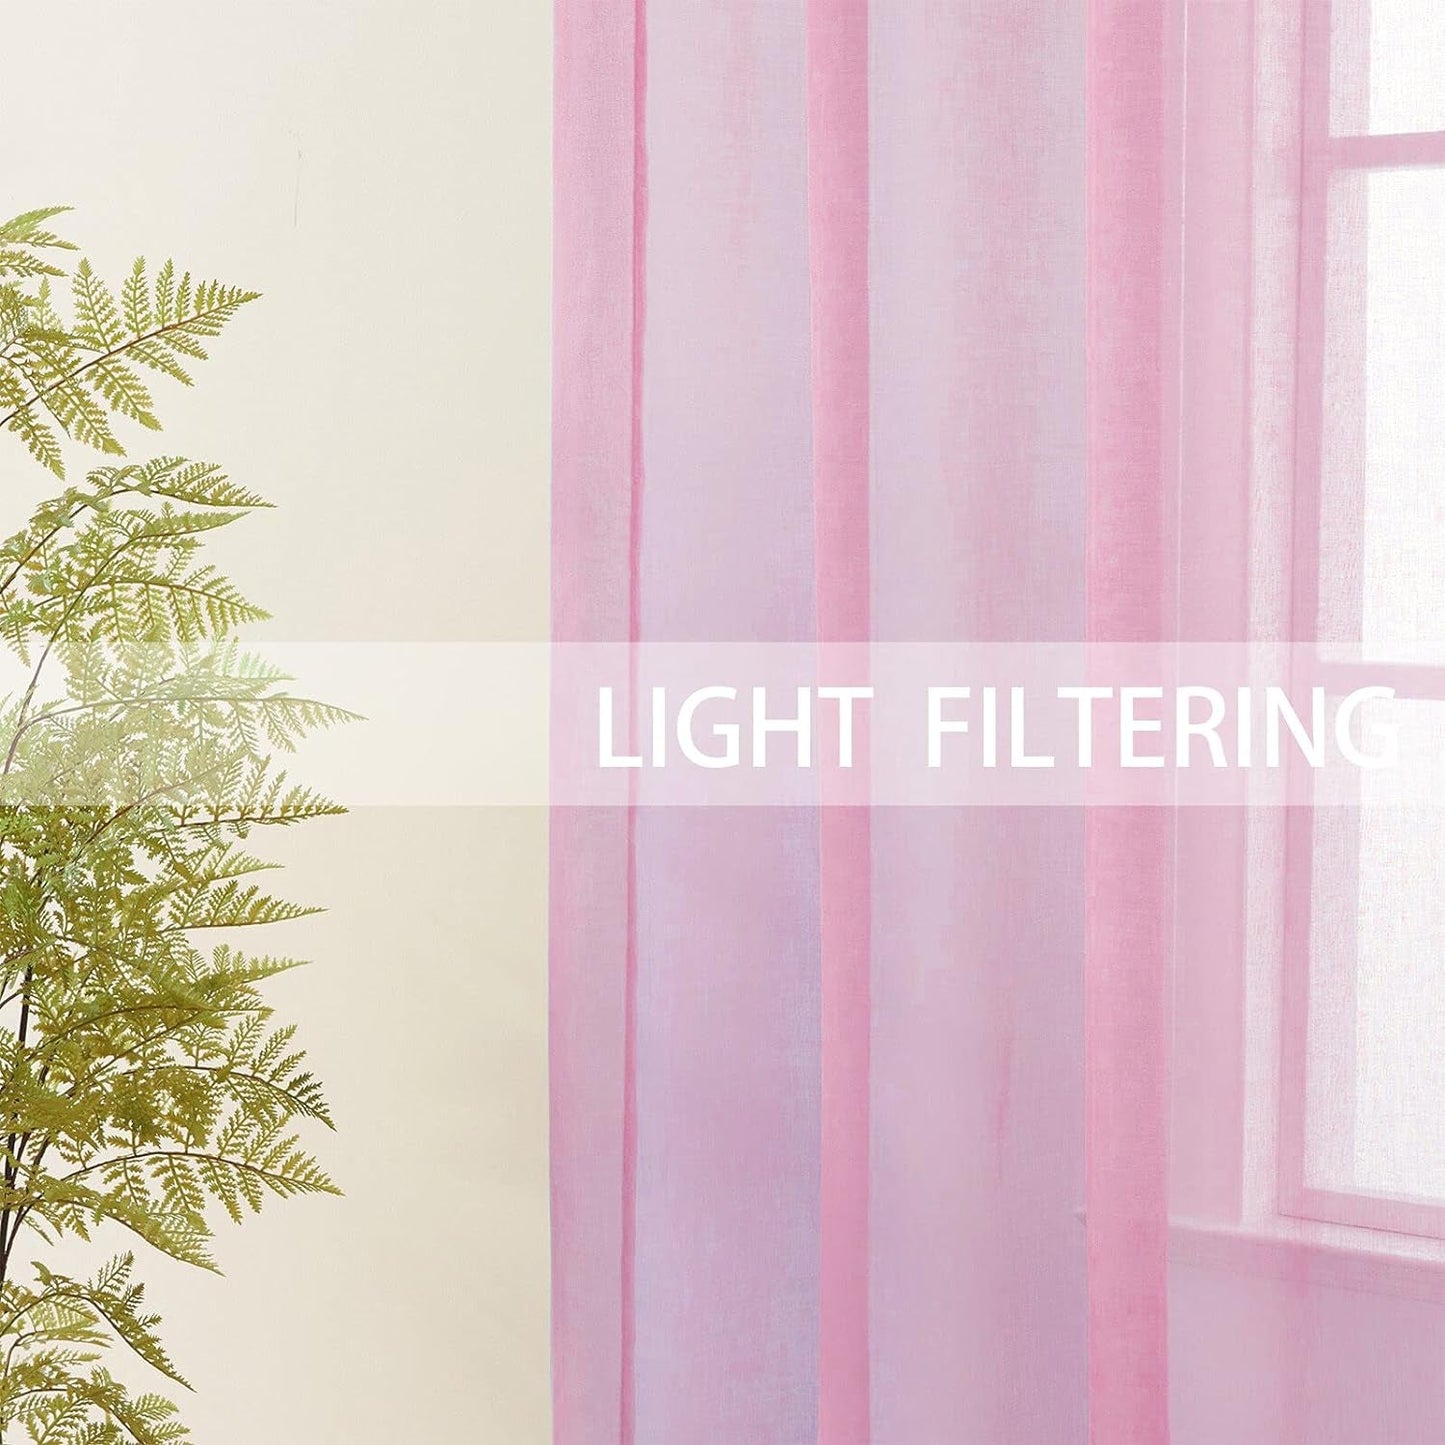 Pink Valance 15 Inches Long Sheer Curtain Valance Living Room Bedroom Kitchen Voile Transparent Light Filtering Valance Curtain Small Short Door Window Treatment 2 Panels Rod Pocket